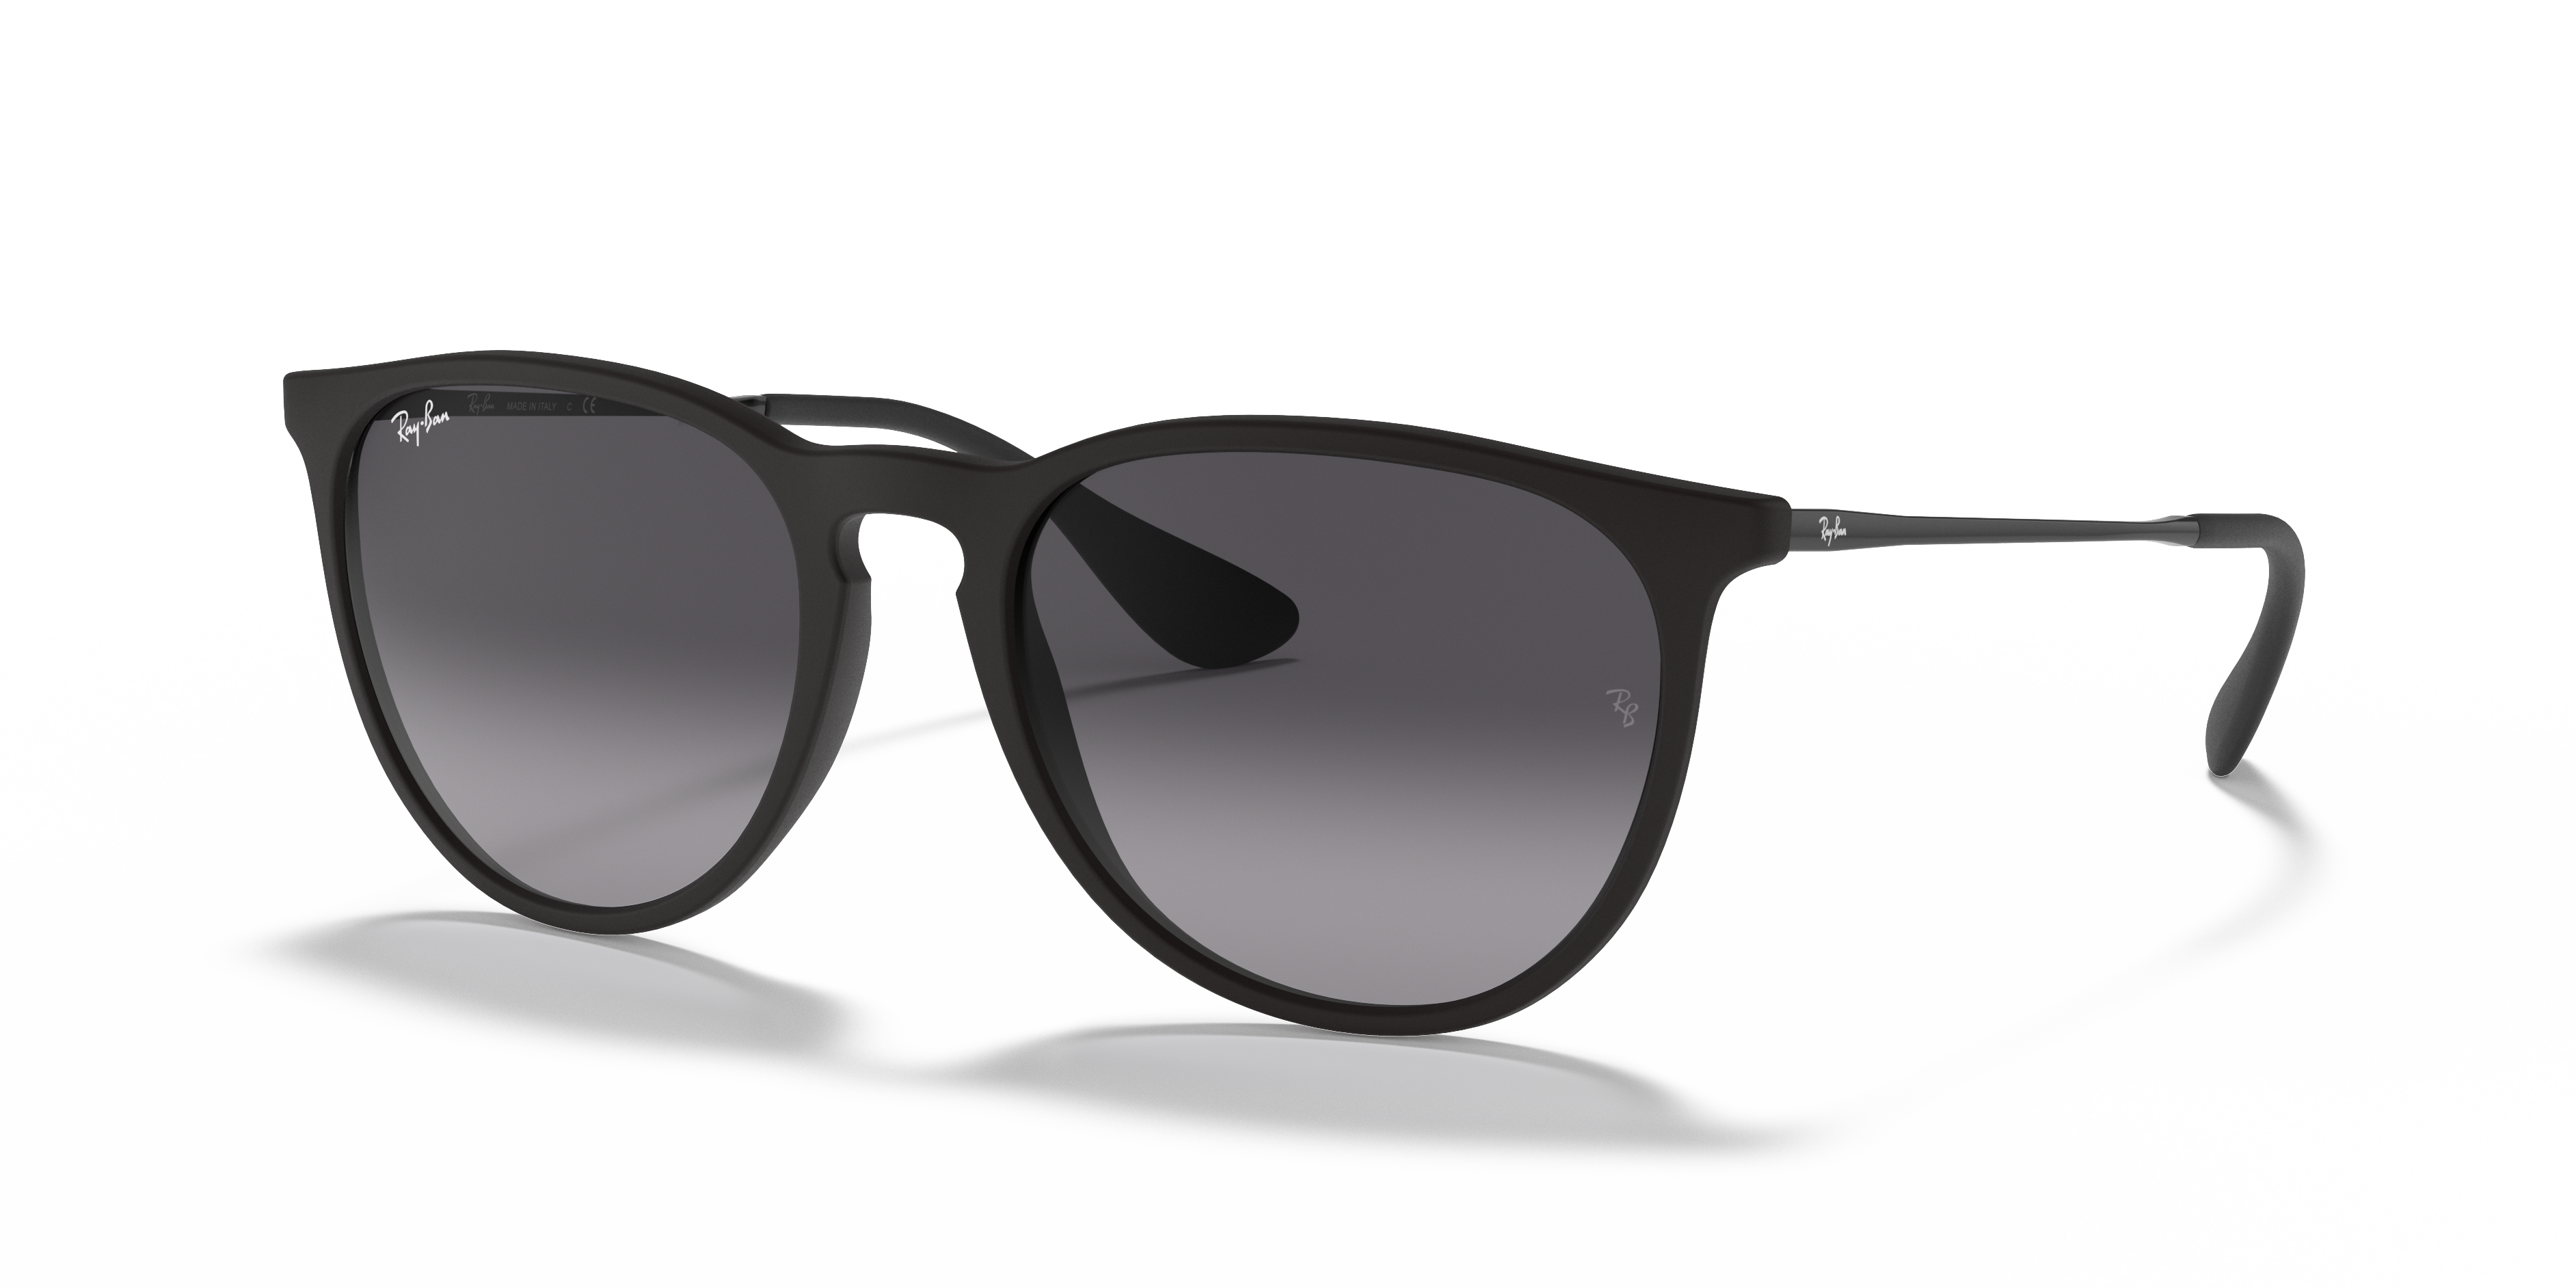 Erika Classic Sunglasses in Black and Grey | Ray-Ban®